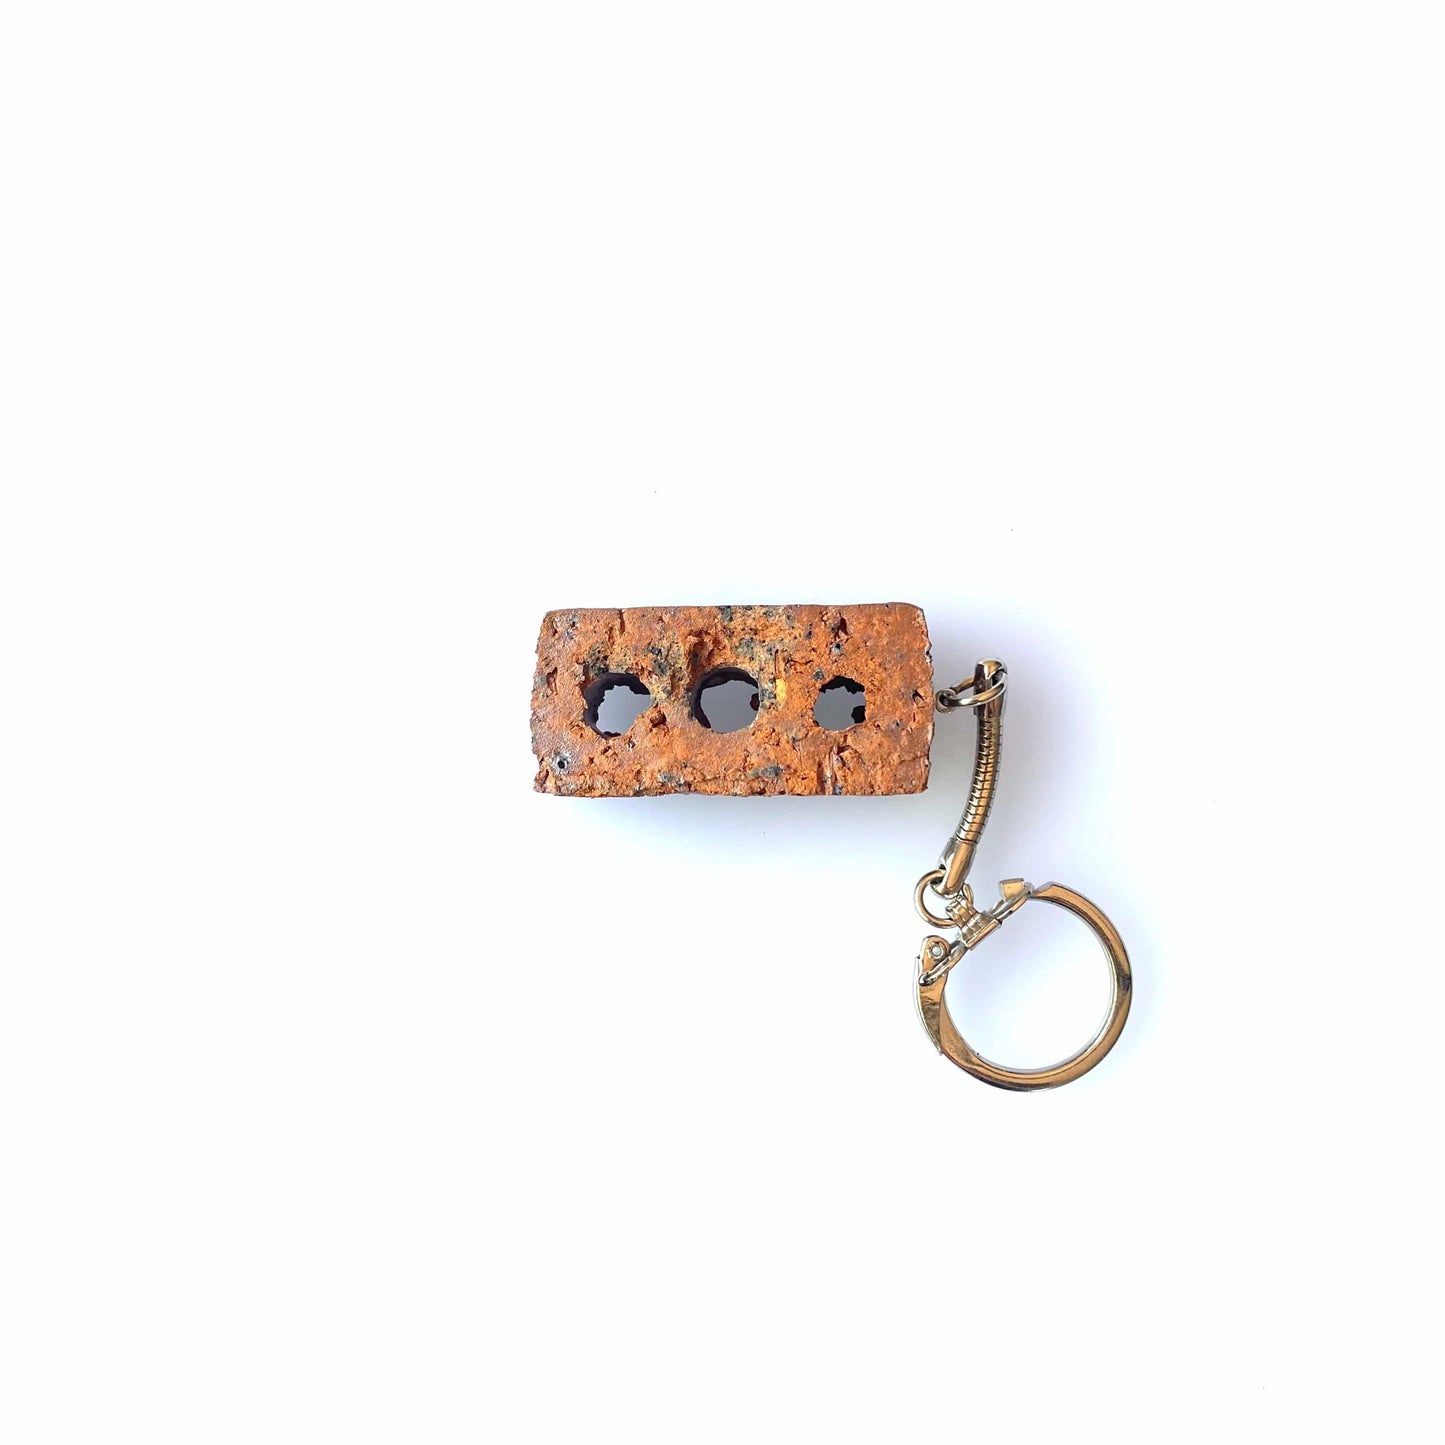 Vintage Endicott Clay Products Employee-Only Keychain Key Ring